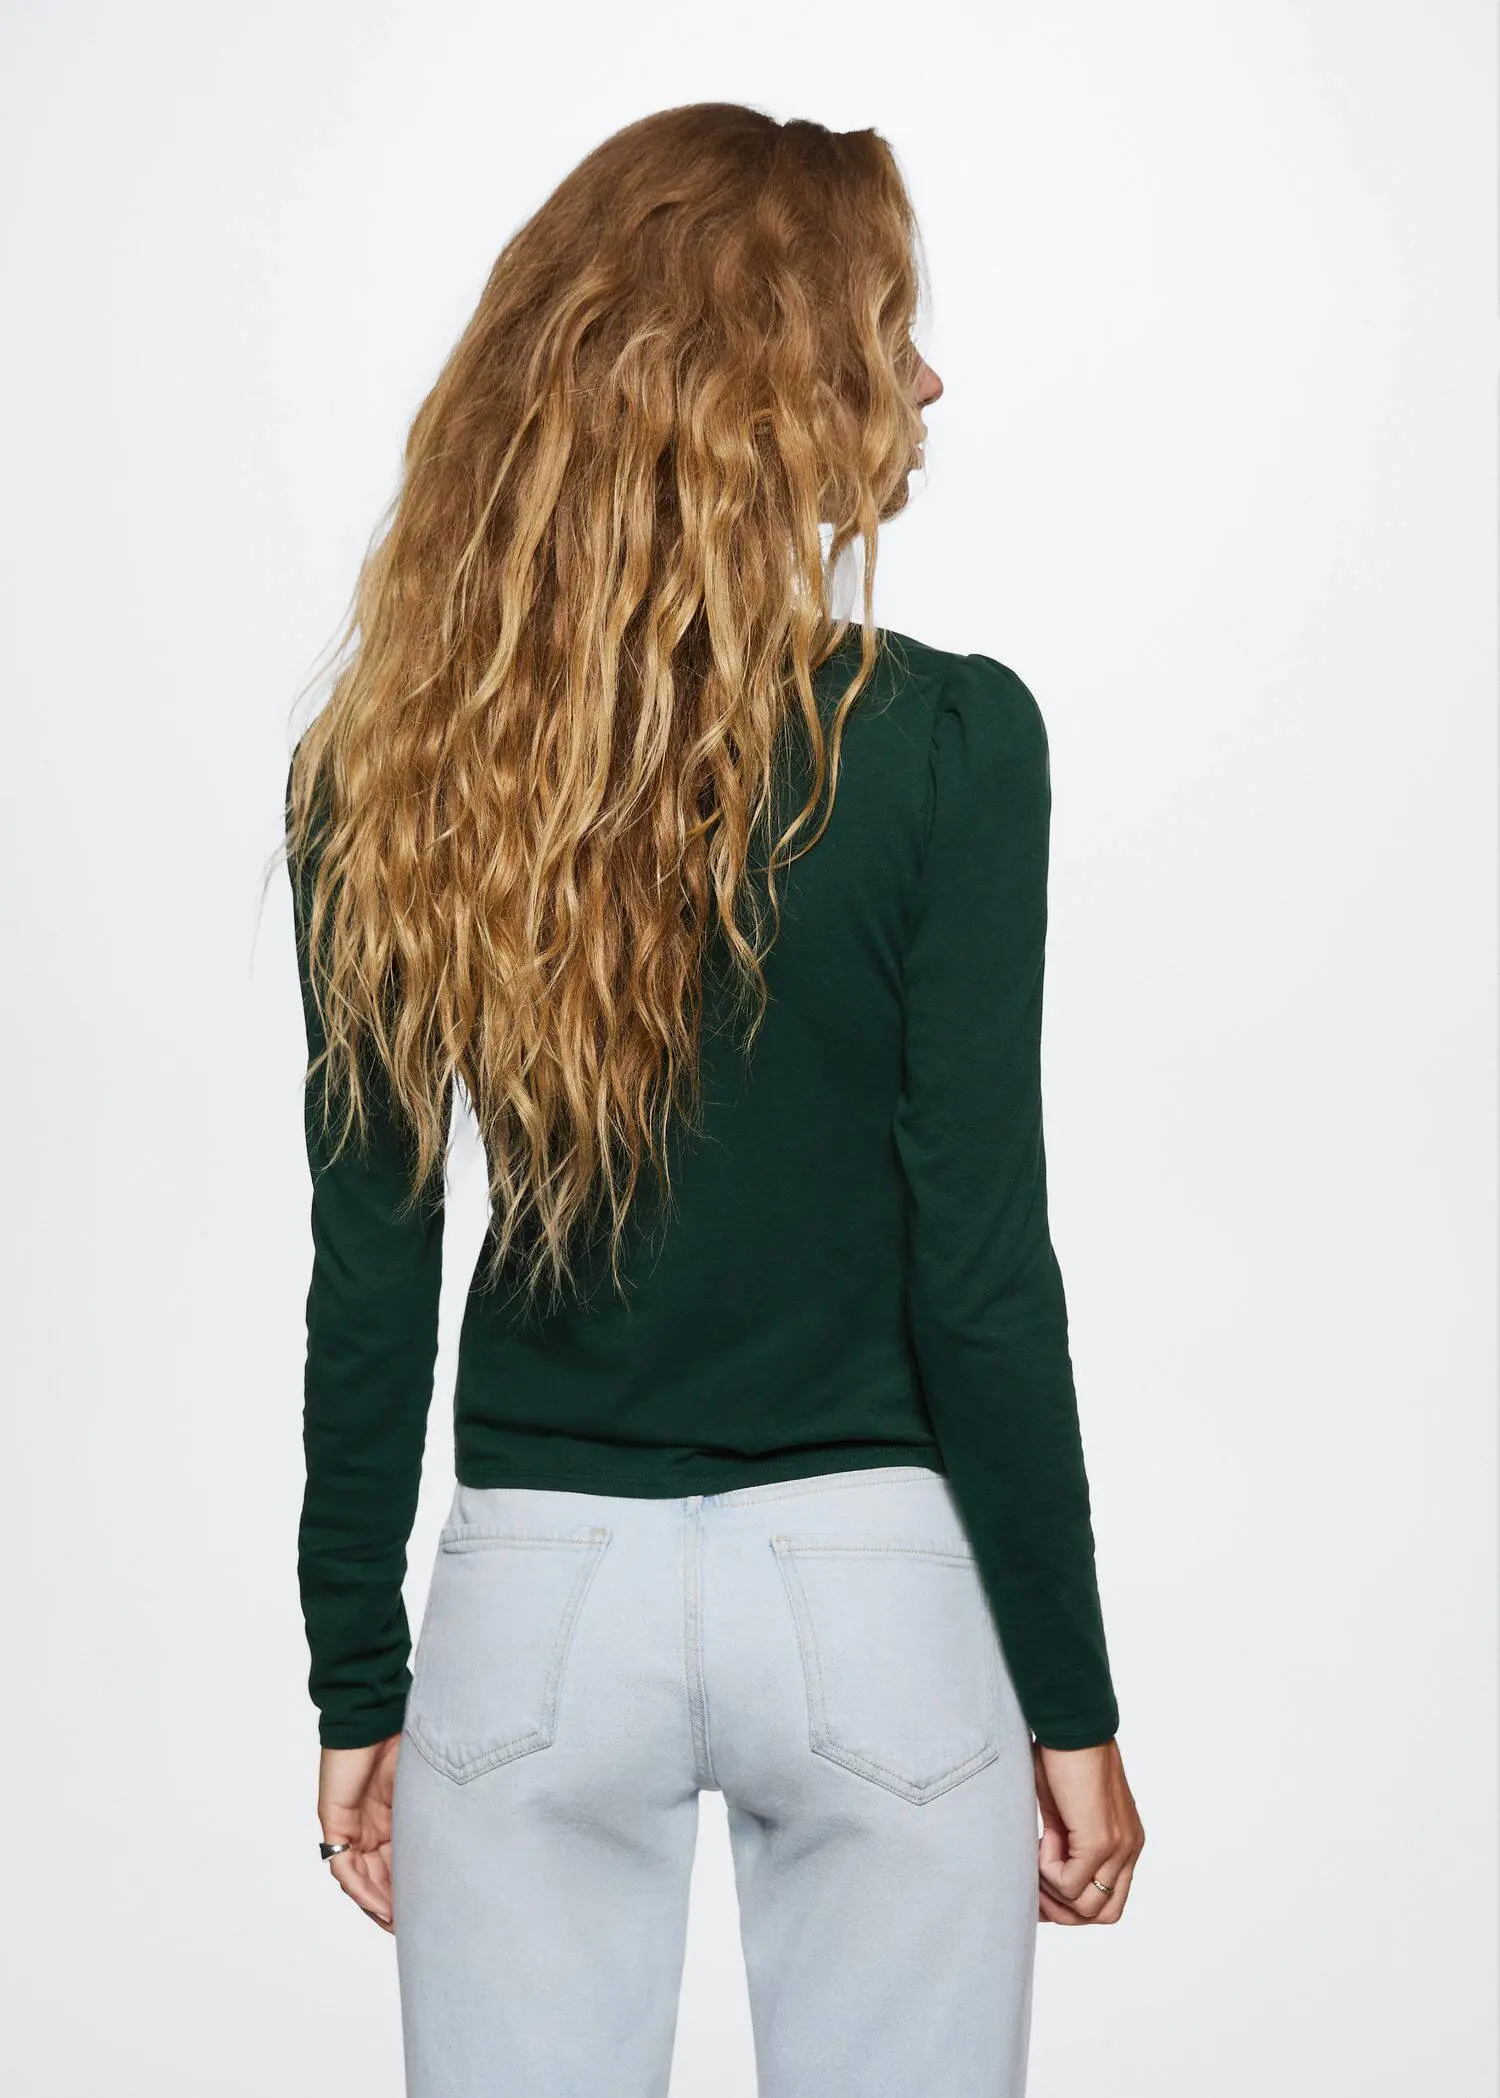 Mango Long-sleeved V-neck T-shirt. the back view of a woman with long blonde hair. 